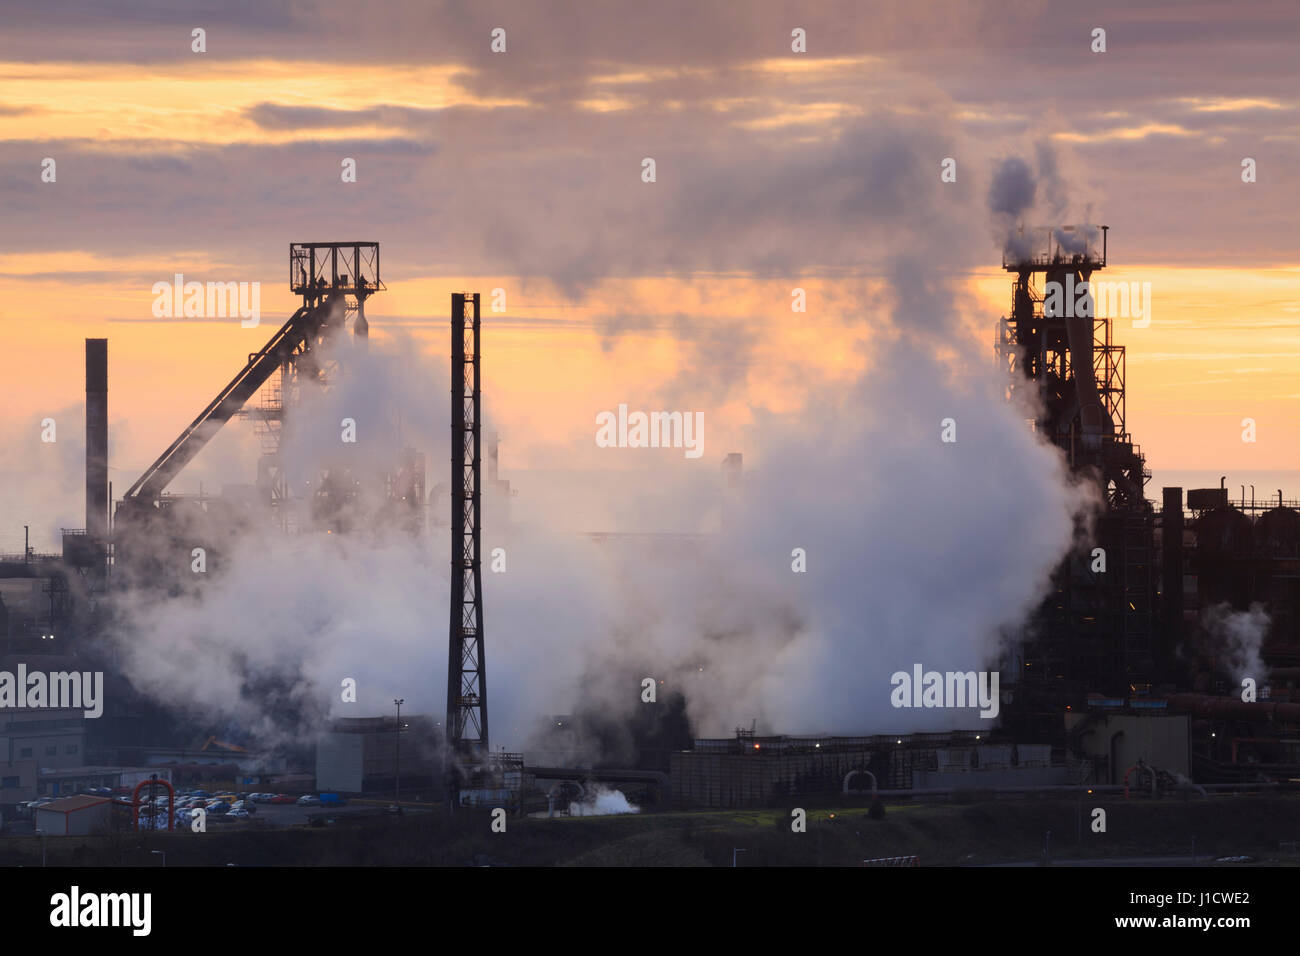 Sunset at Port Talbot Steel Works, South Wales, Wales, United Kingdom Stock Photo